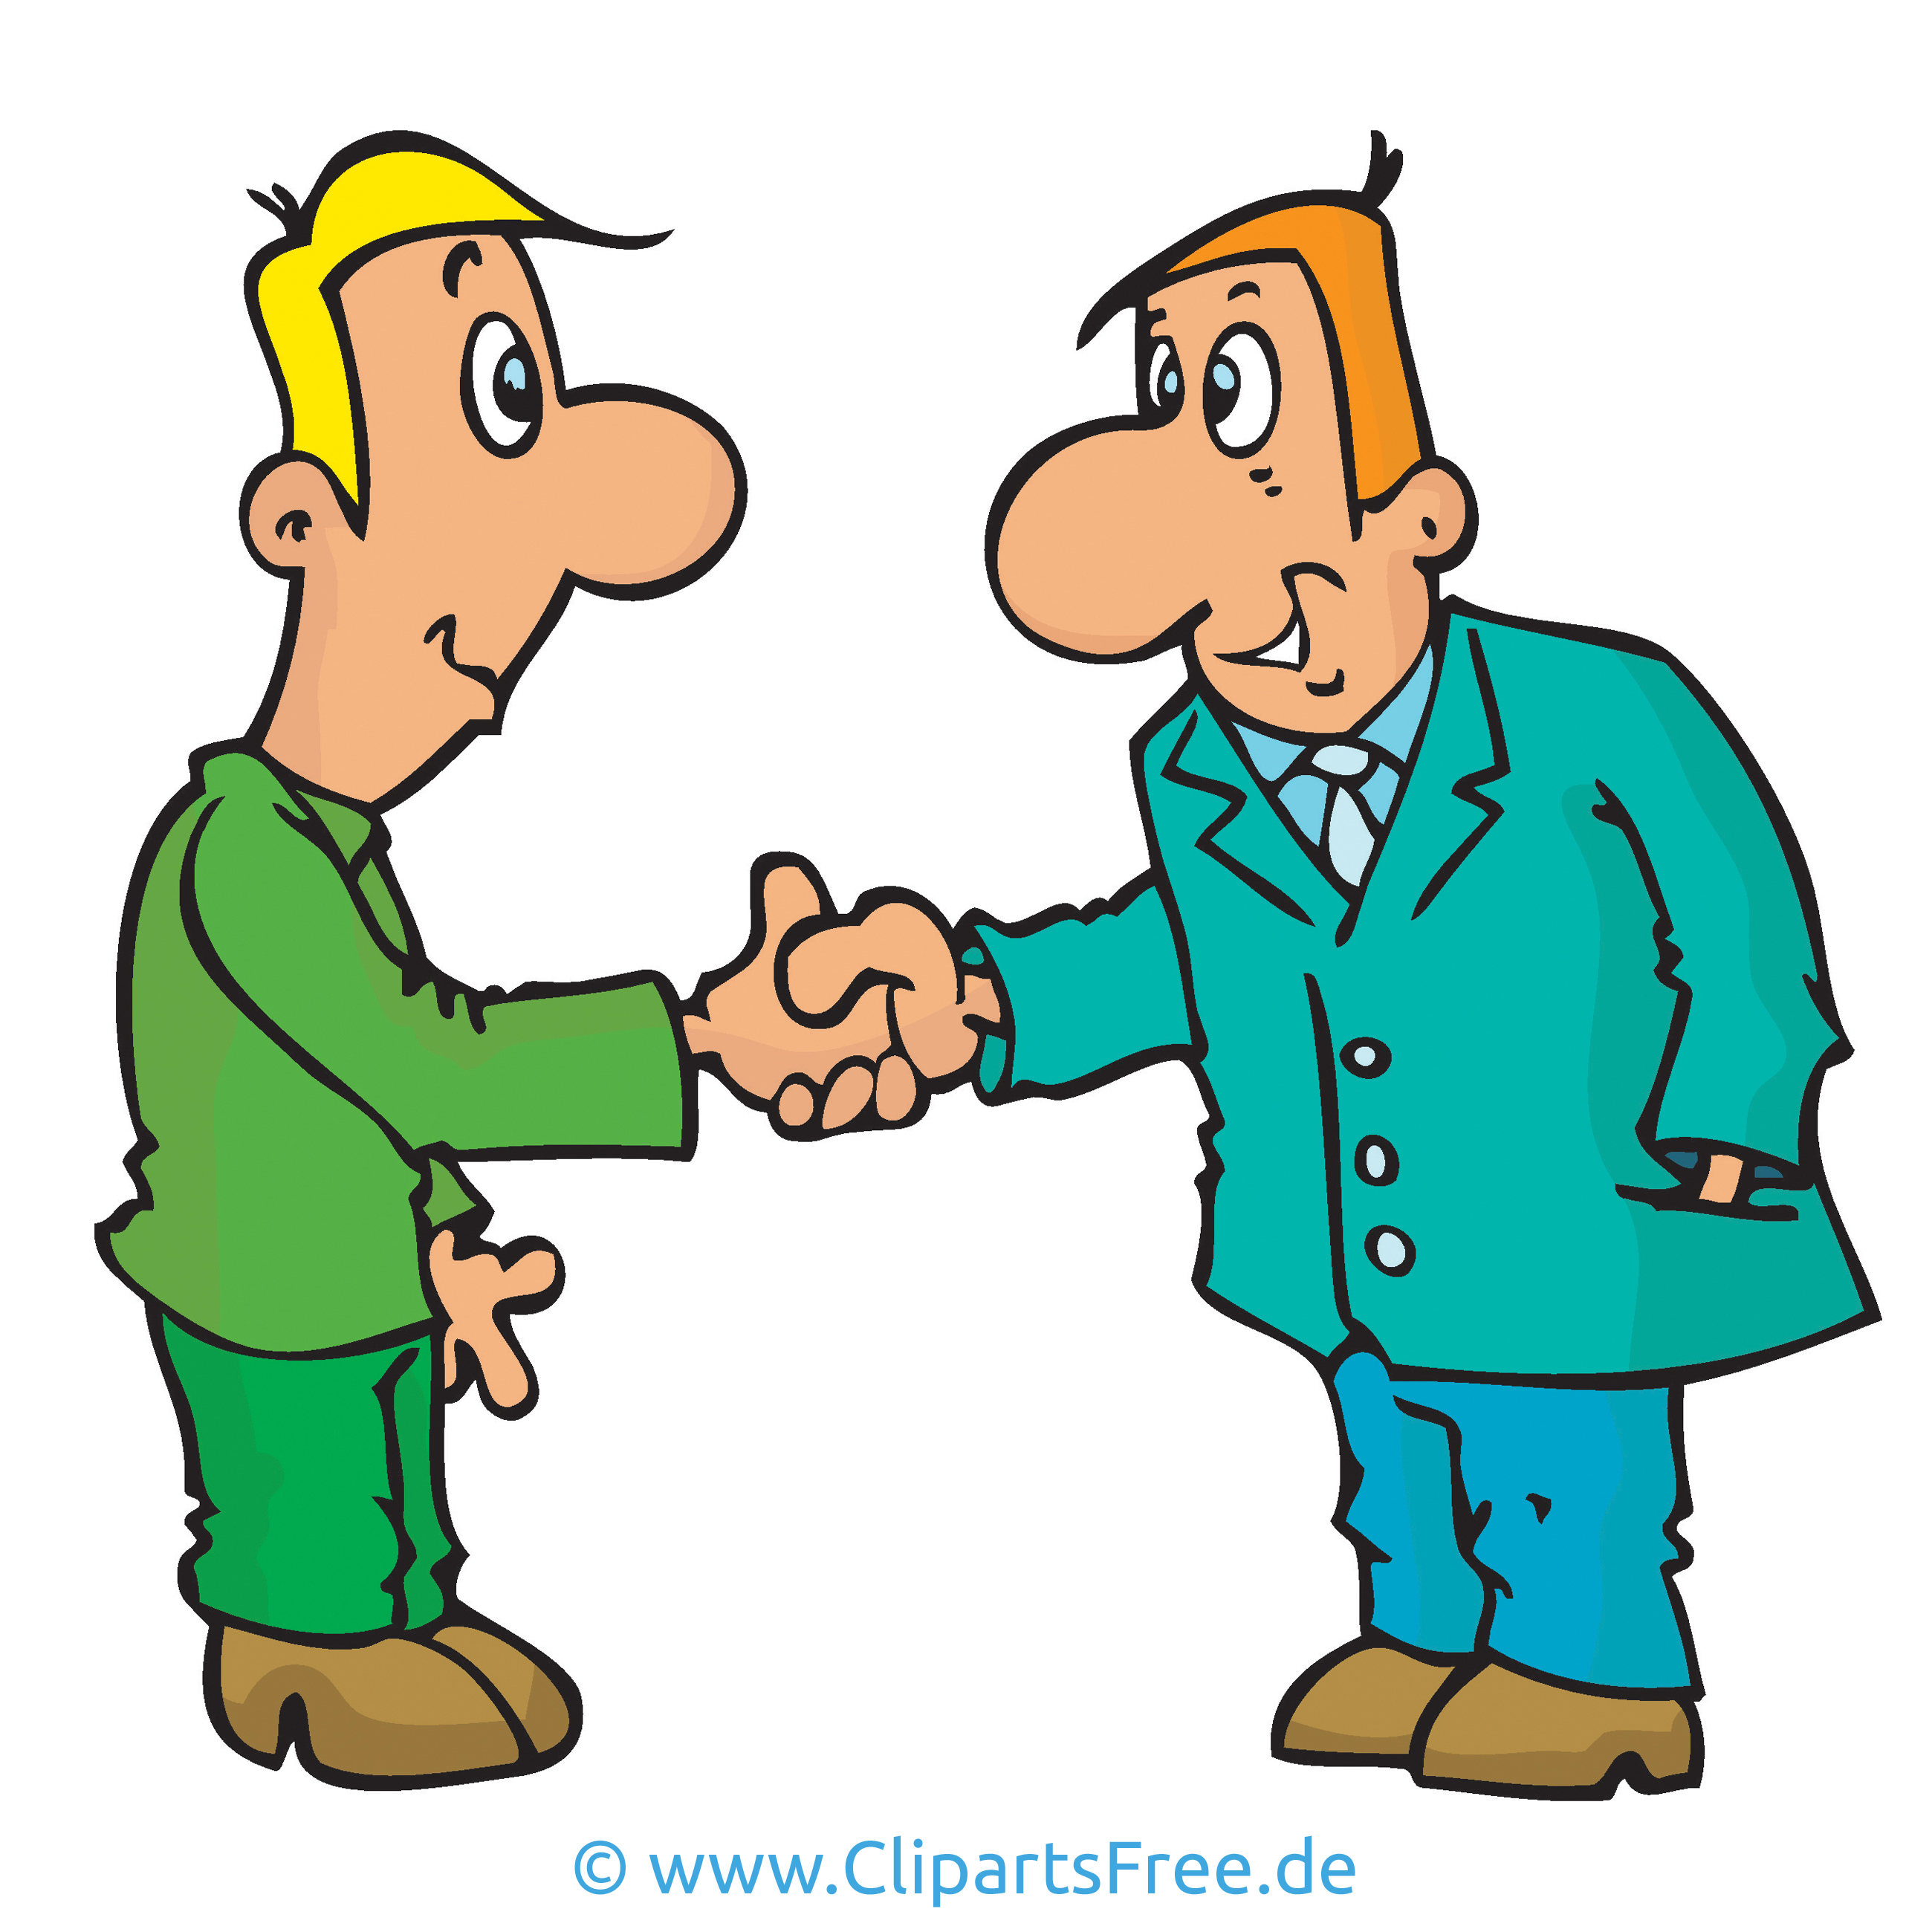 clipart meeting - photo #35